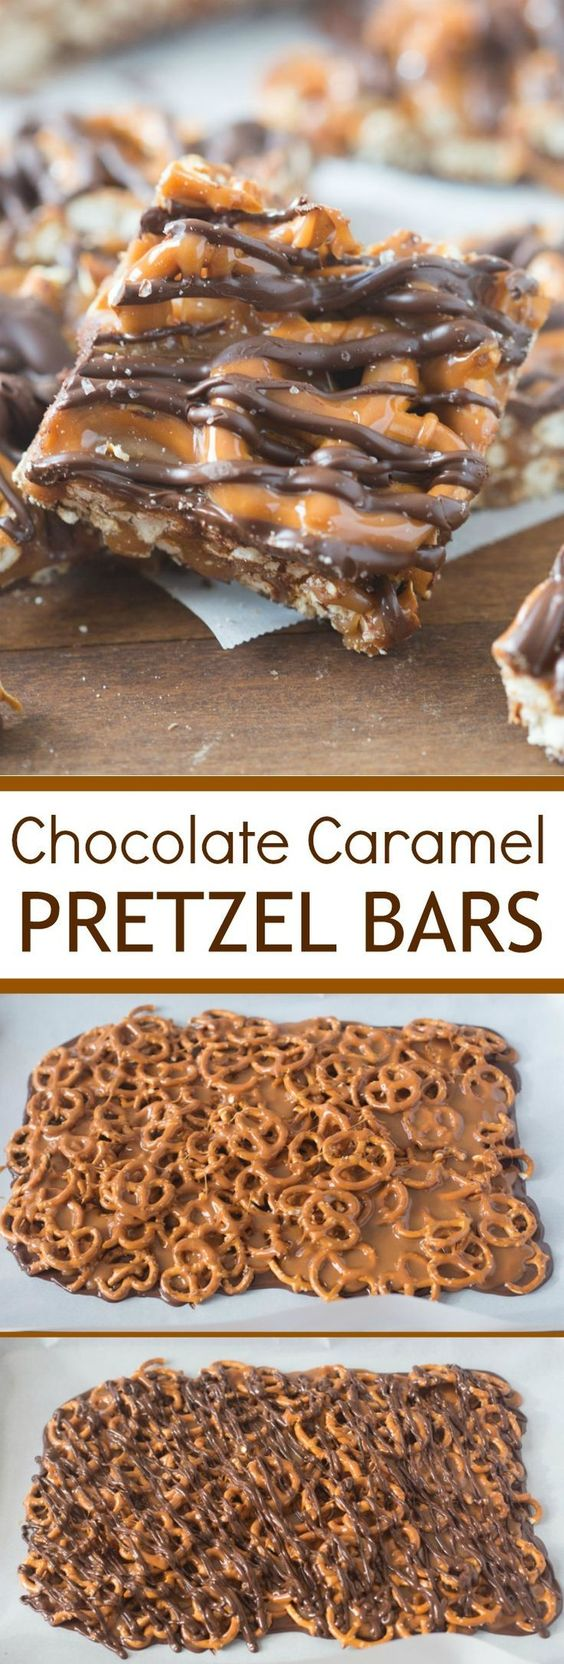 The Best Easy Desserts Bars Recipes – Favorite New Plus Classic Simple Bar Cookies and Quick Big Batch Party Treats Bars for a Crowd -   18 desserts For Parties cookies ideas